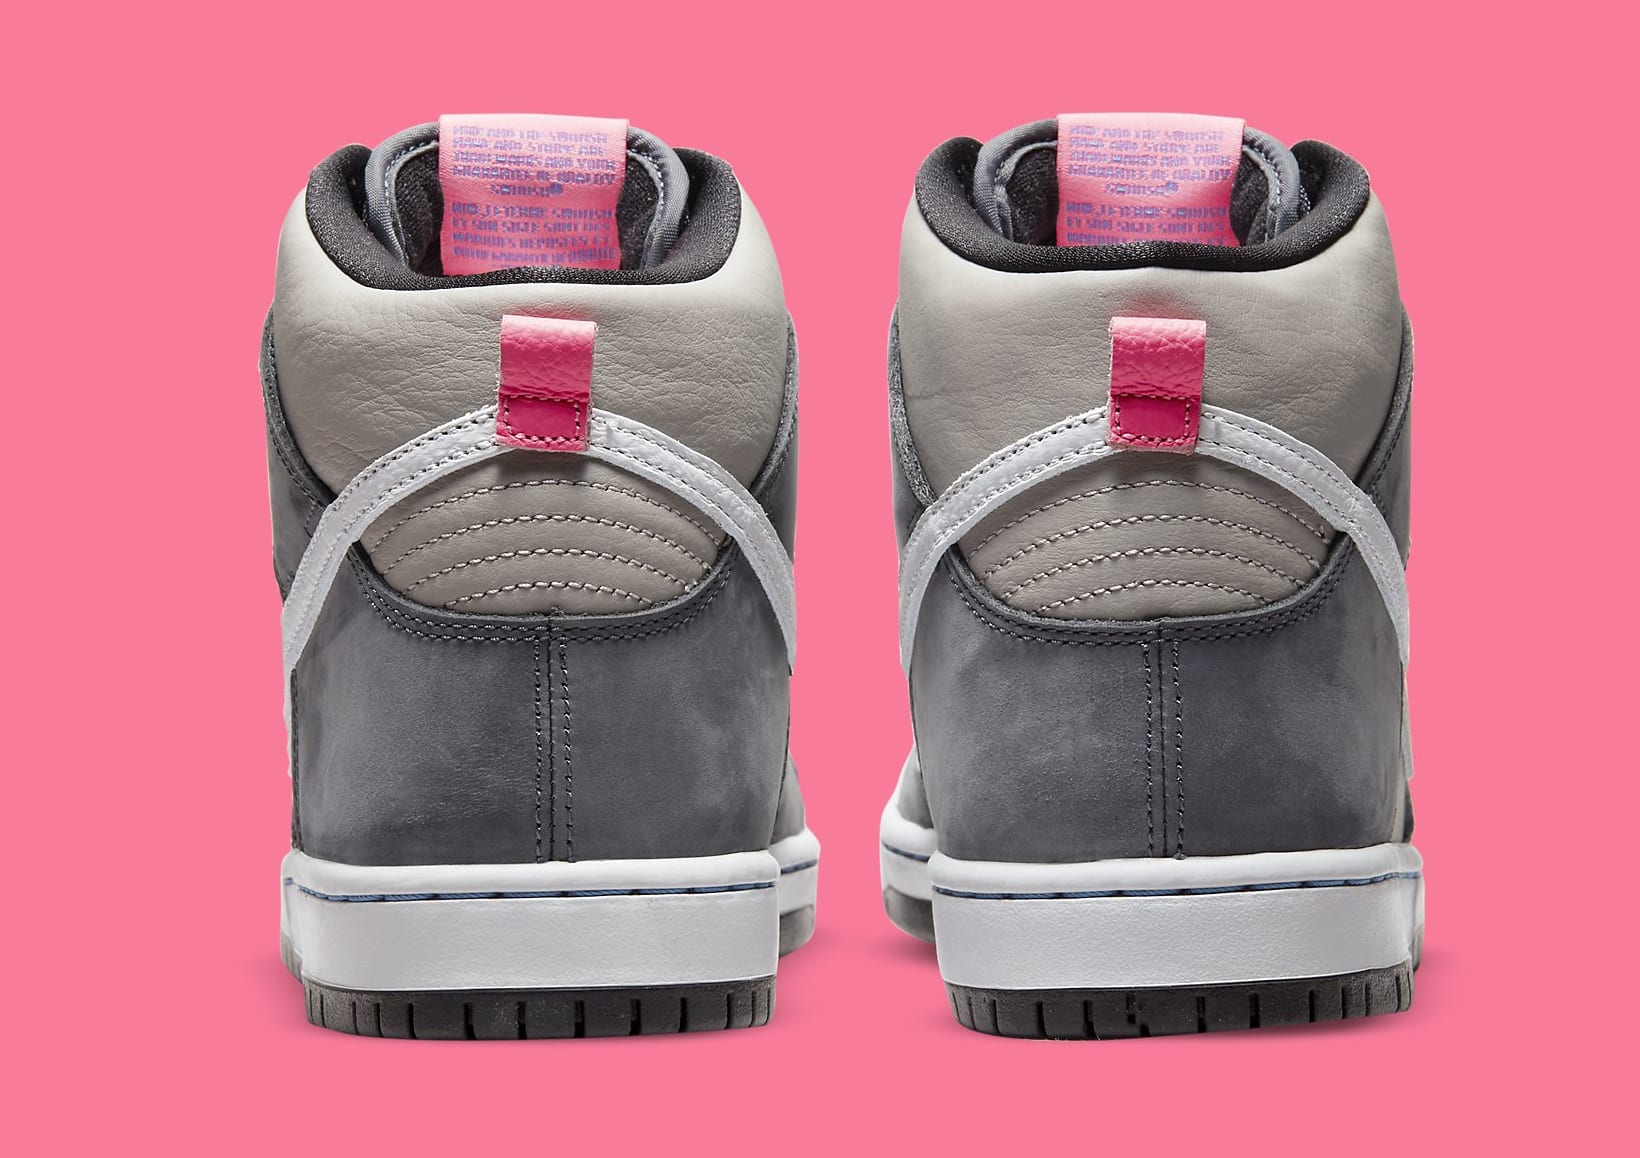 ACG Boots Inspire These New Nike SB Dunks